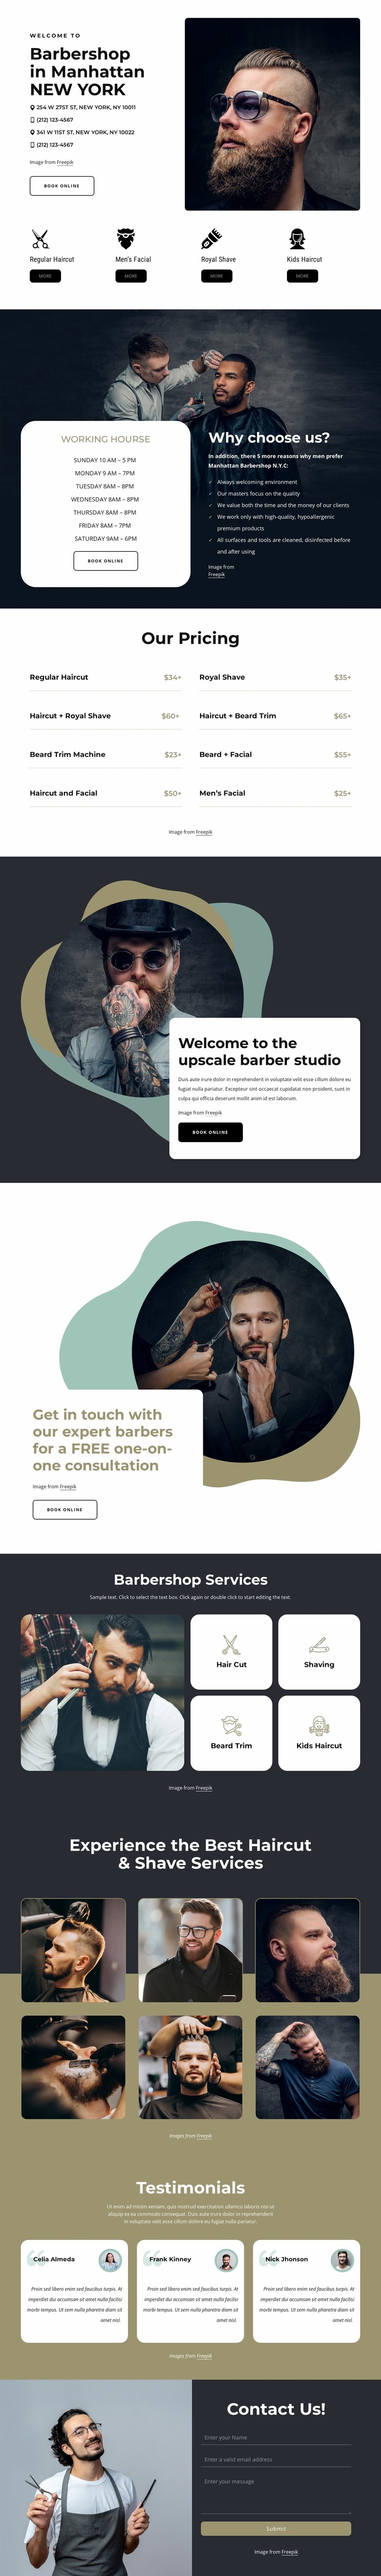 Hight quality grooming services WordPress Website Builder